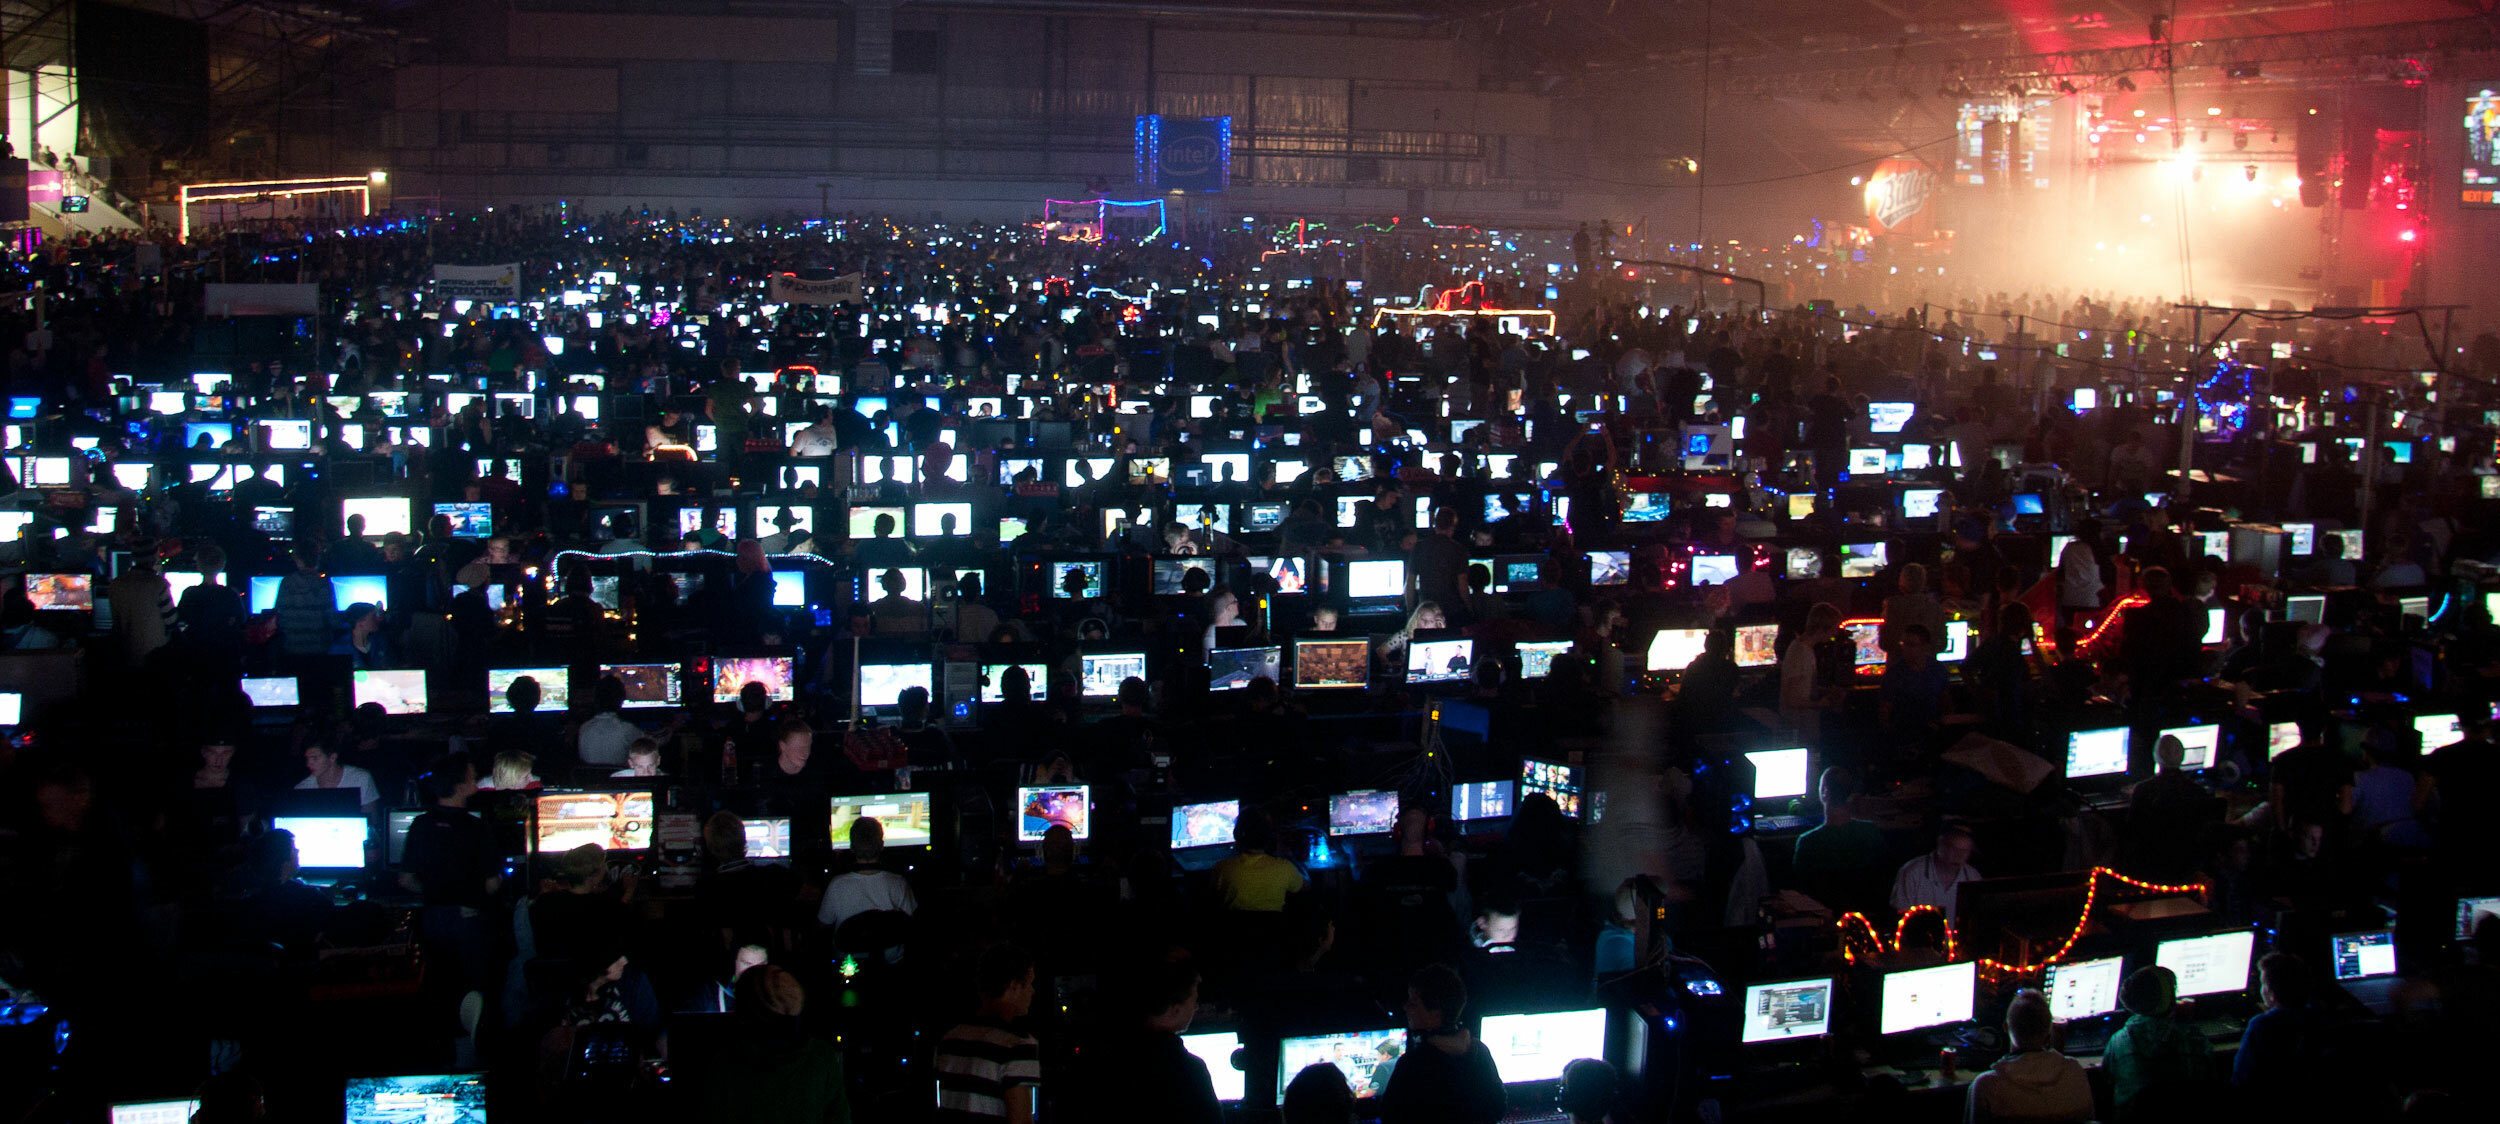 Hundreds of people playing video games on computers in front of them